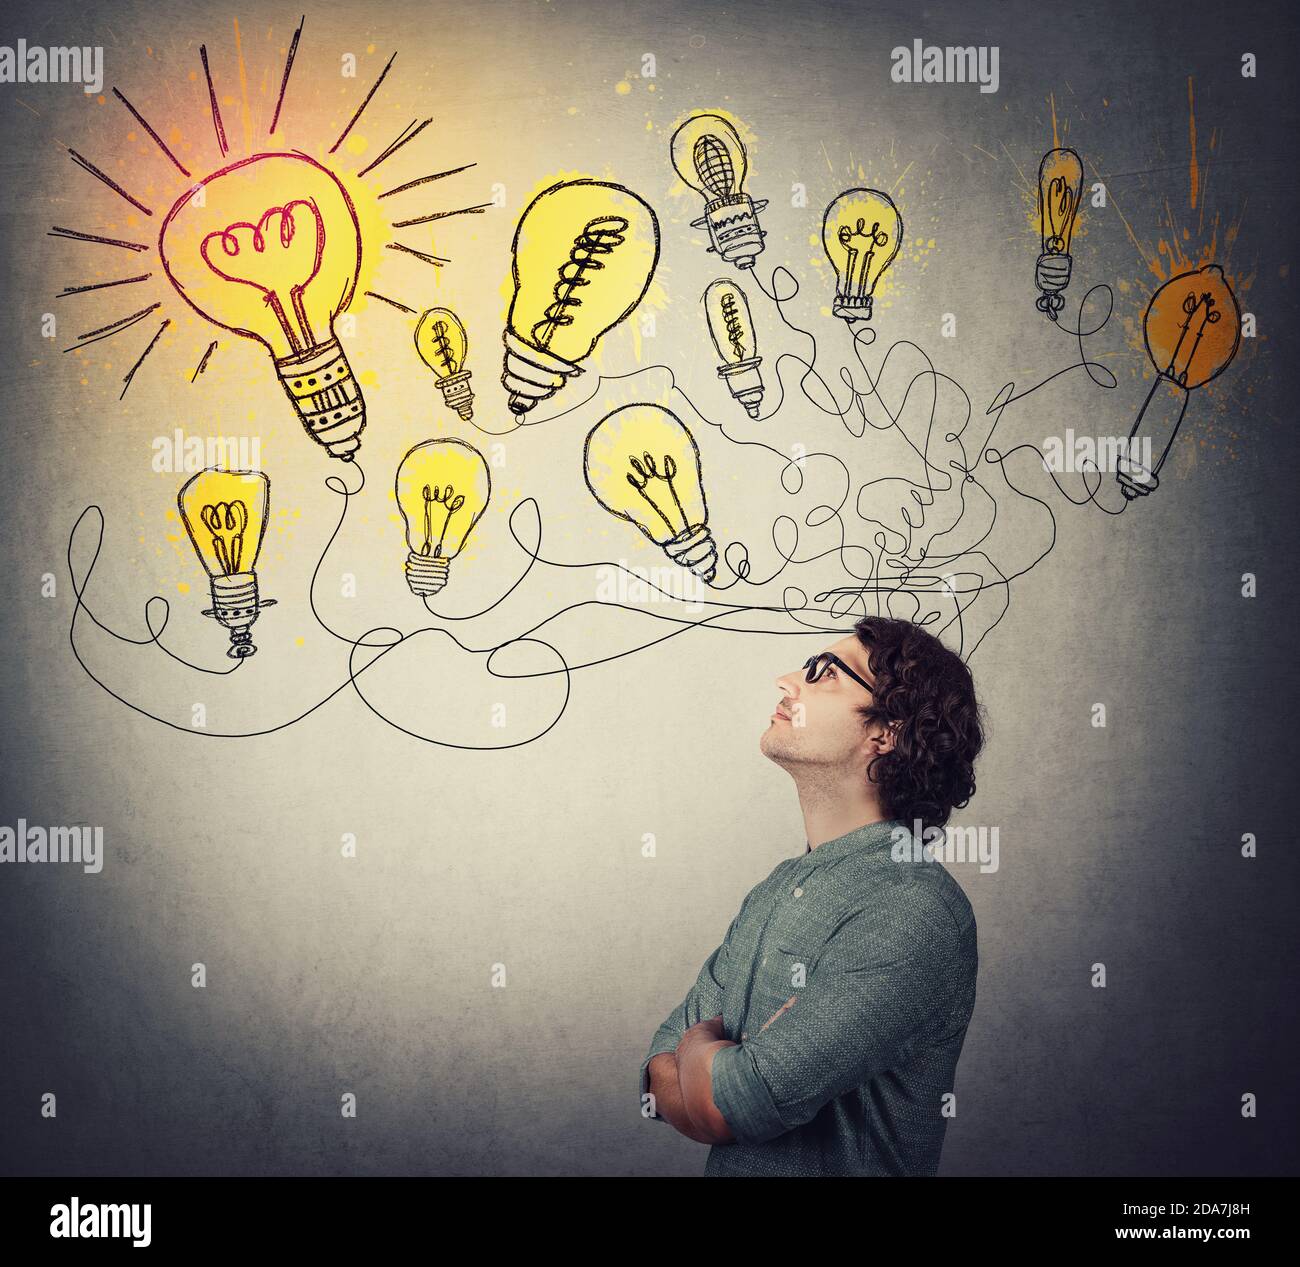 https://c8.alamy.com/comp/2DA7J8H/creative-businessman-thinking-of-great-ideas-looking-at-bright-lightbulbs-on-the-wall-business-worker-search-for-solutions-to-solve-the-problems-g-2DA7J8H.jpg